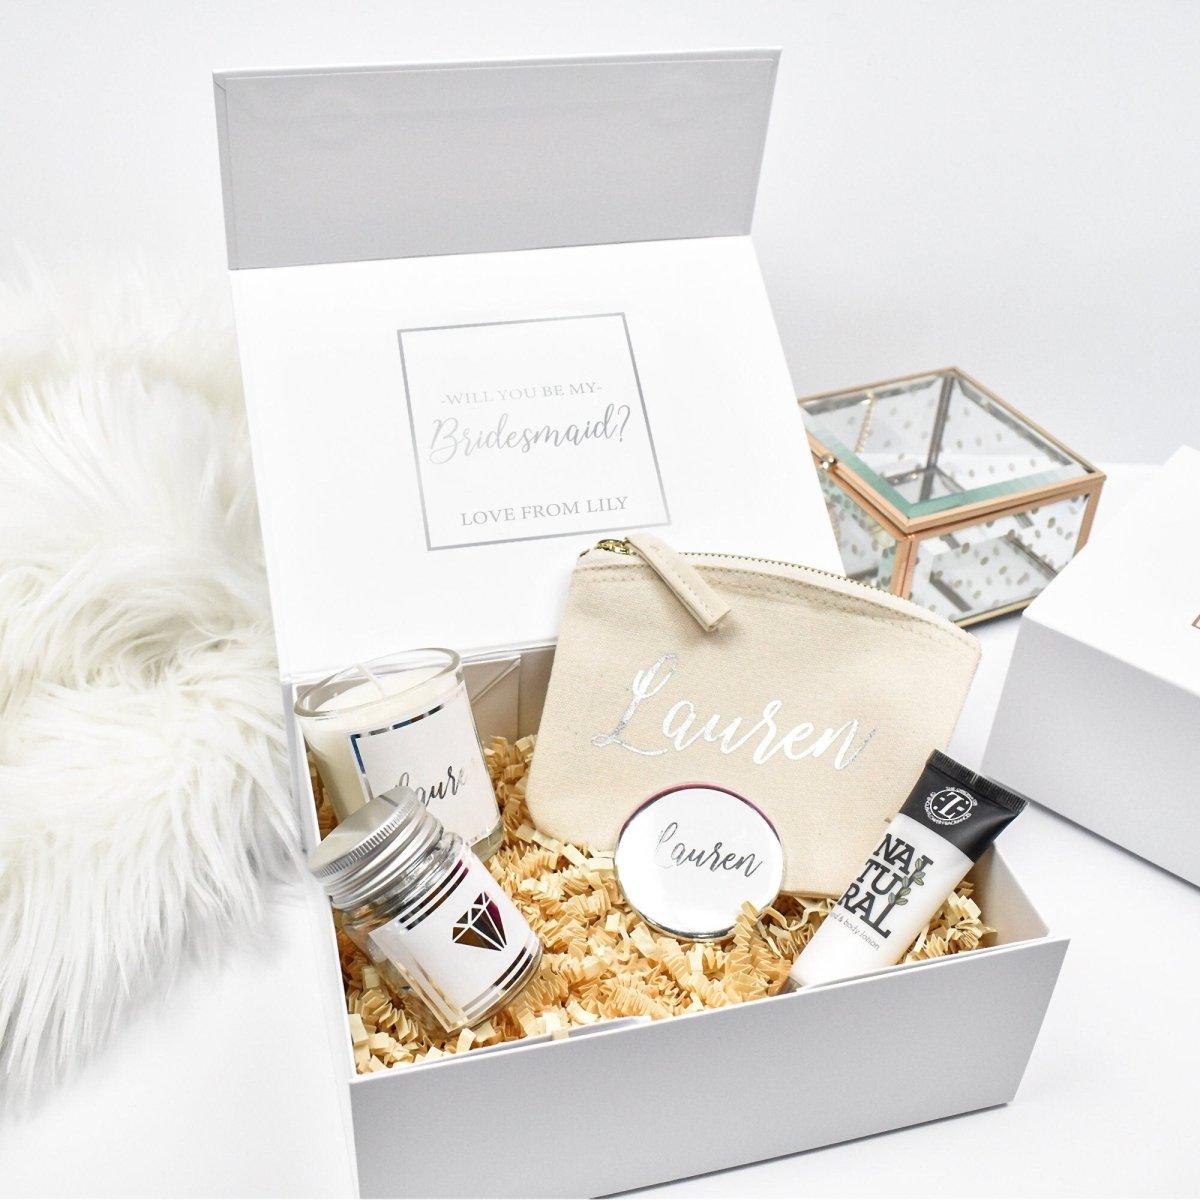 Personalised Silver Bridesmaid Proposal Gift Box, Luxury Filled Thank You Bridesmaid Box, Bridesmaid Gift Set, Wedding Thank You Gifts - Amy Lucy